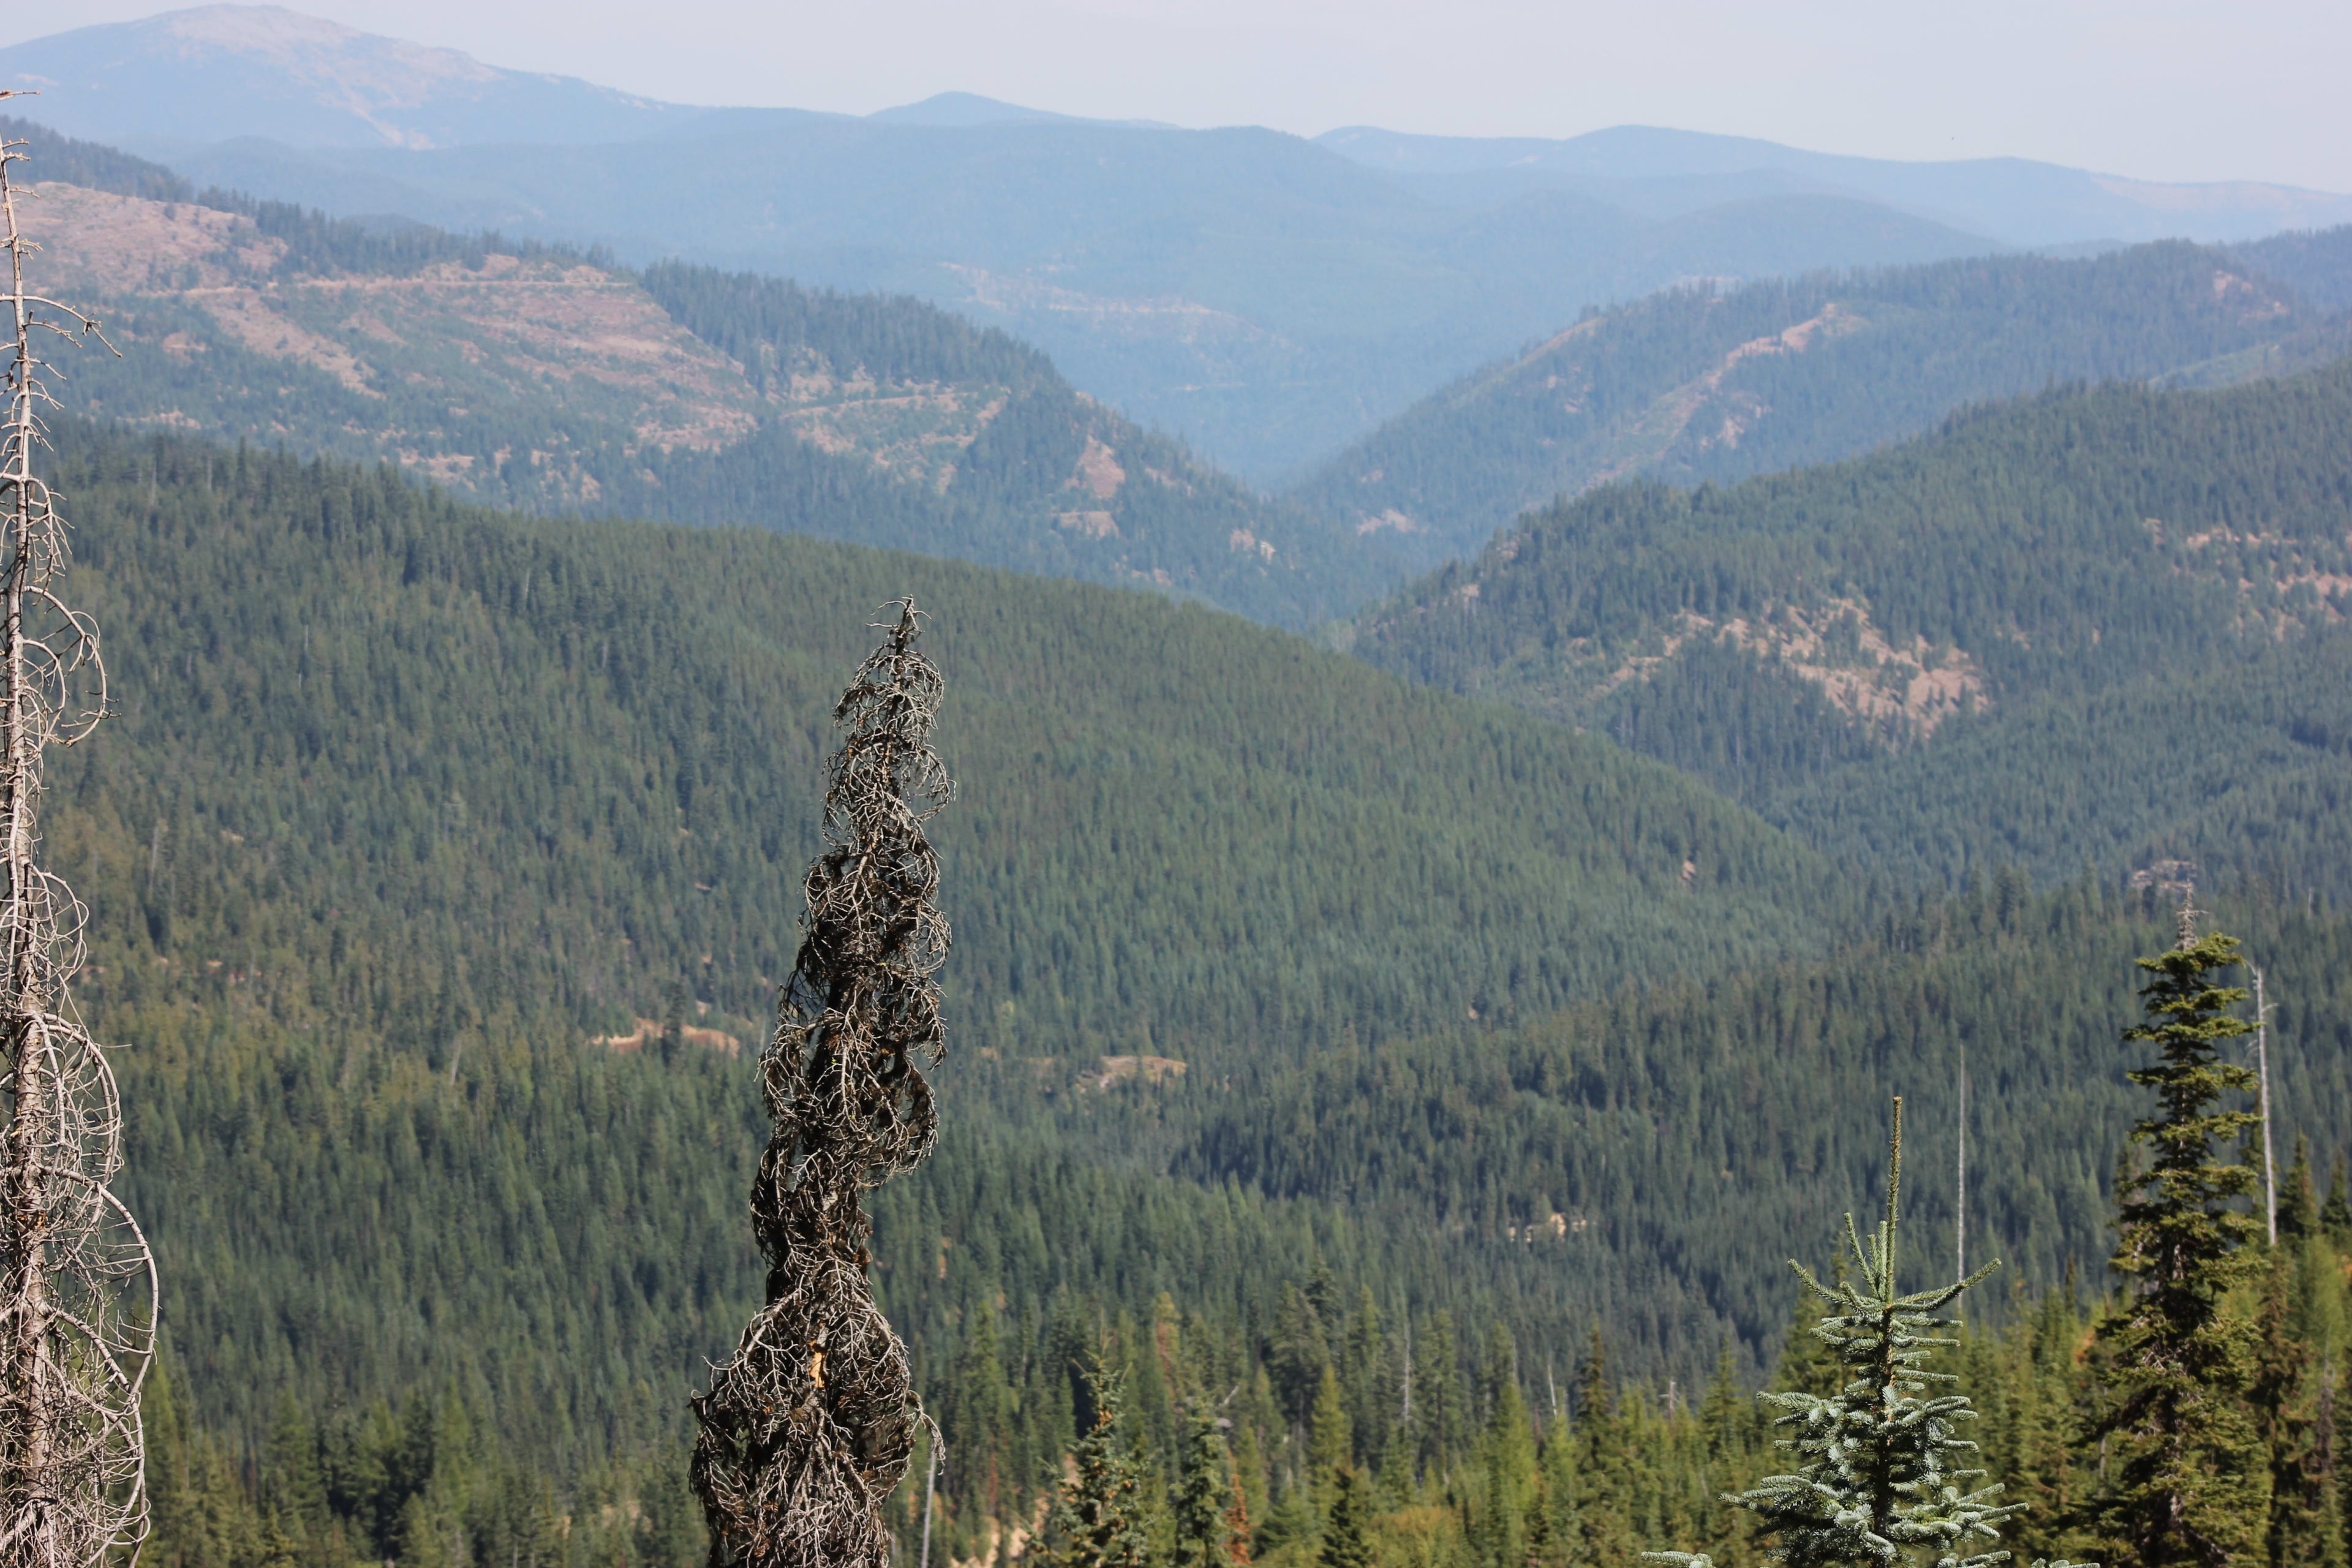 Idaho Panhandle National Forests